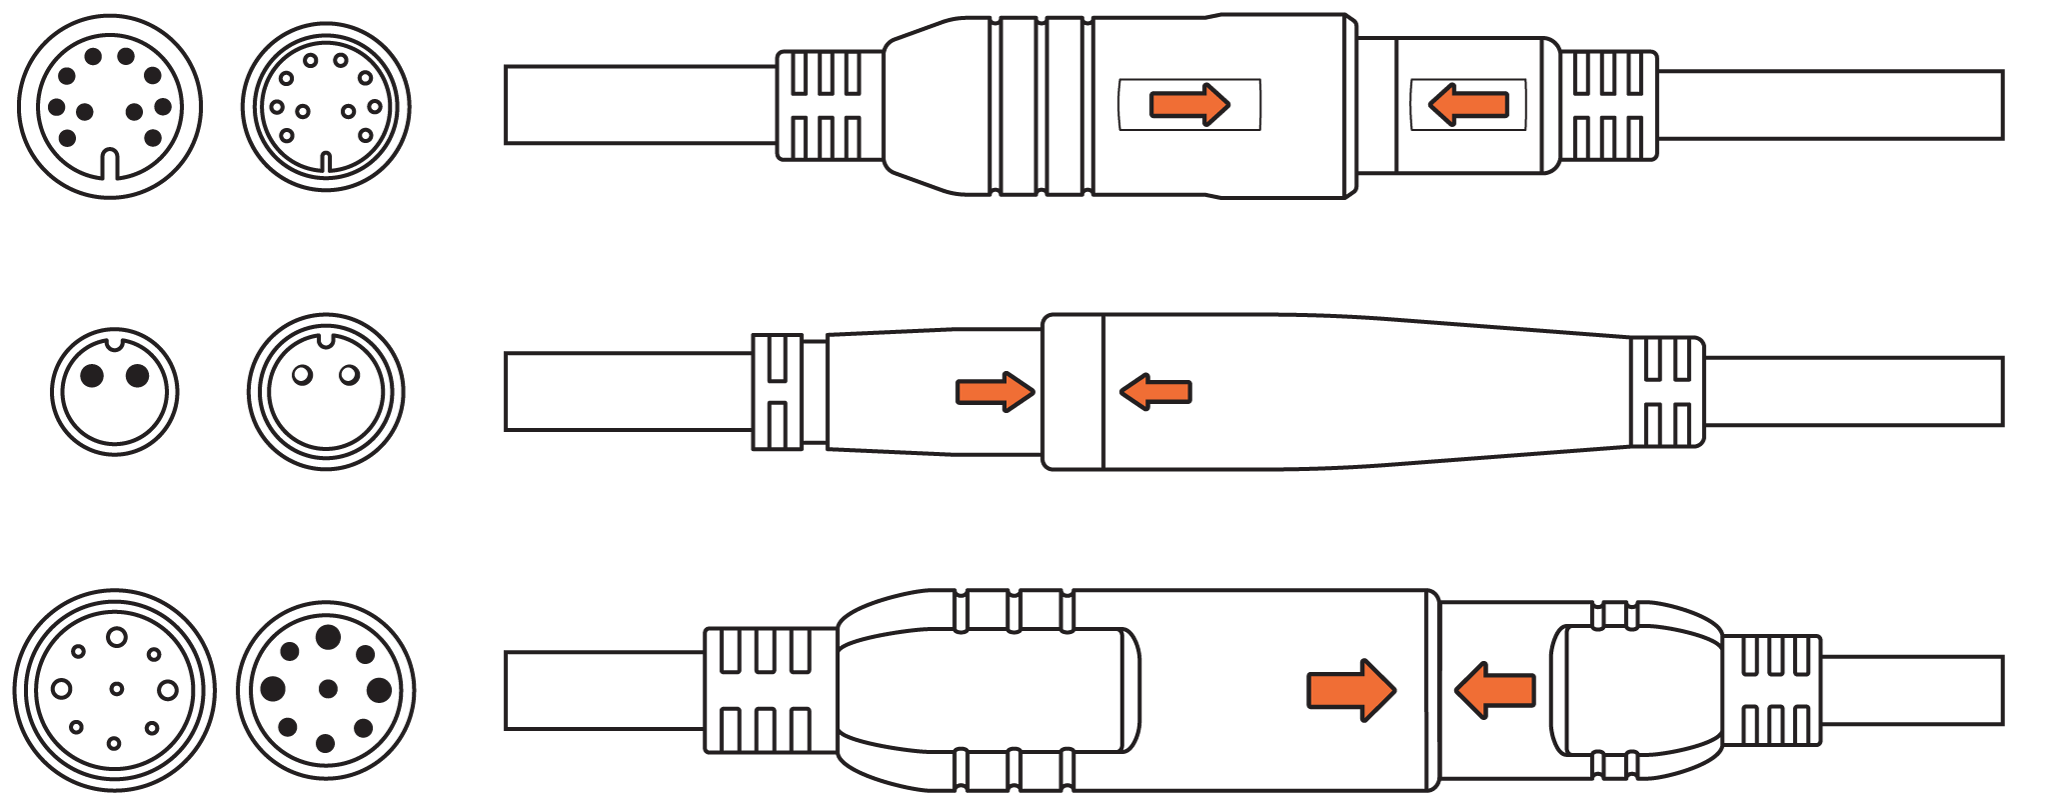 RADTrike_Cables_fig4b.png